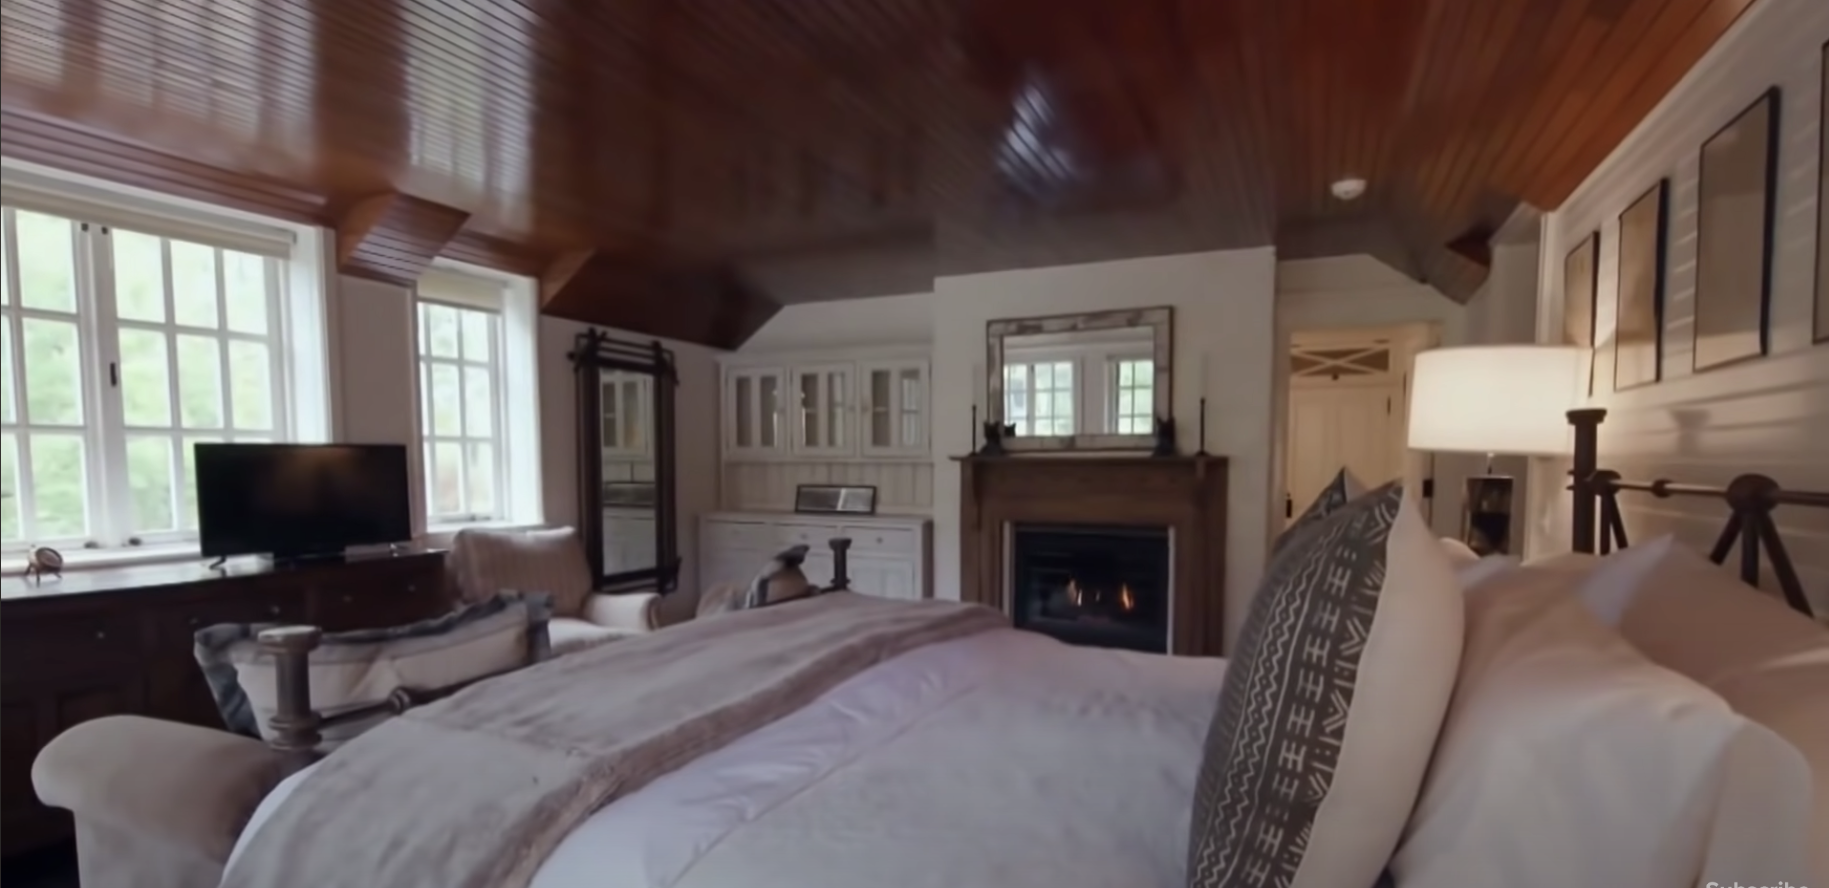 Kevin Costner's Aspen estate, as shown in a YouTube video | Source: youtube.com/@CNBCMakeIt